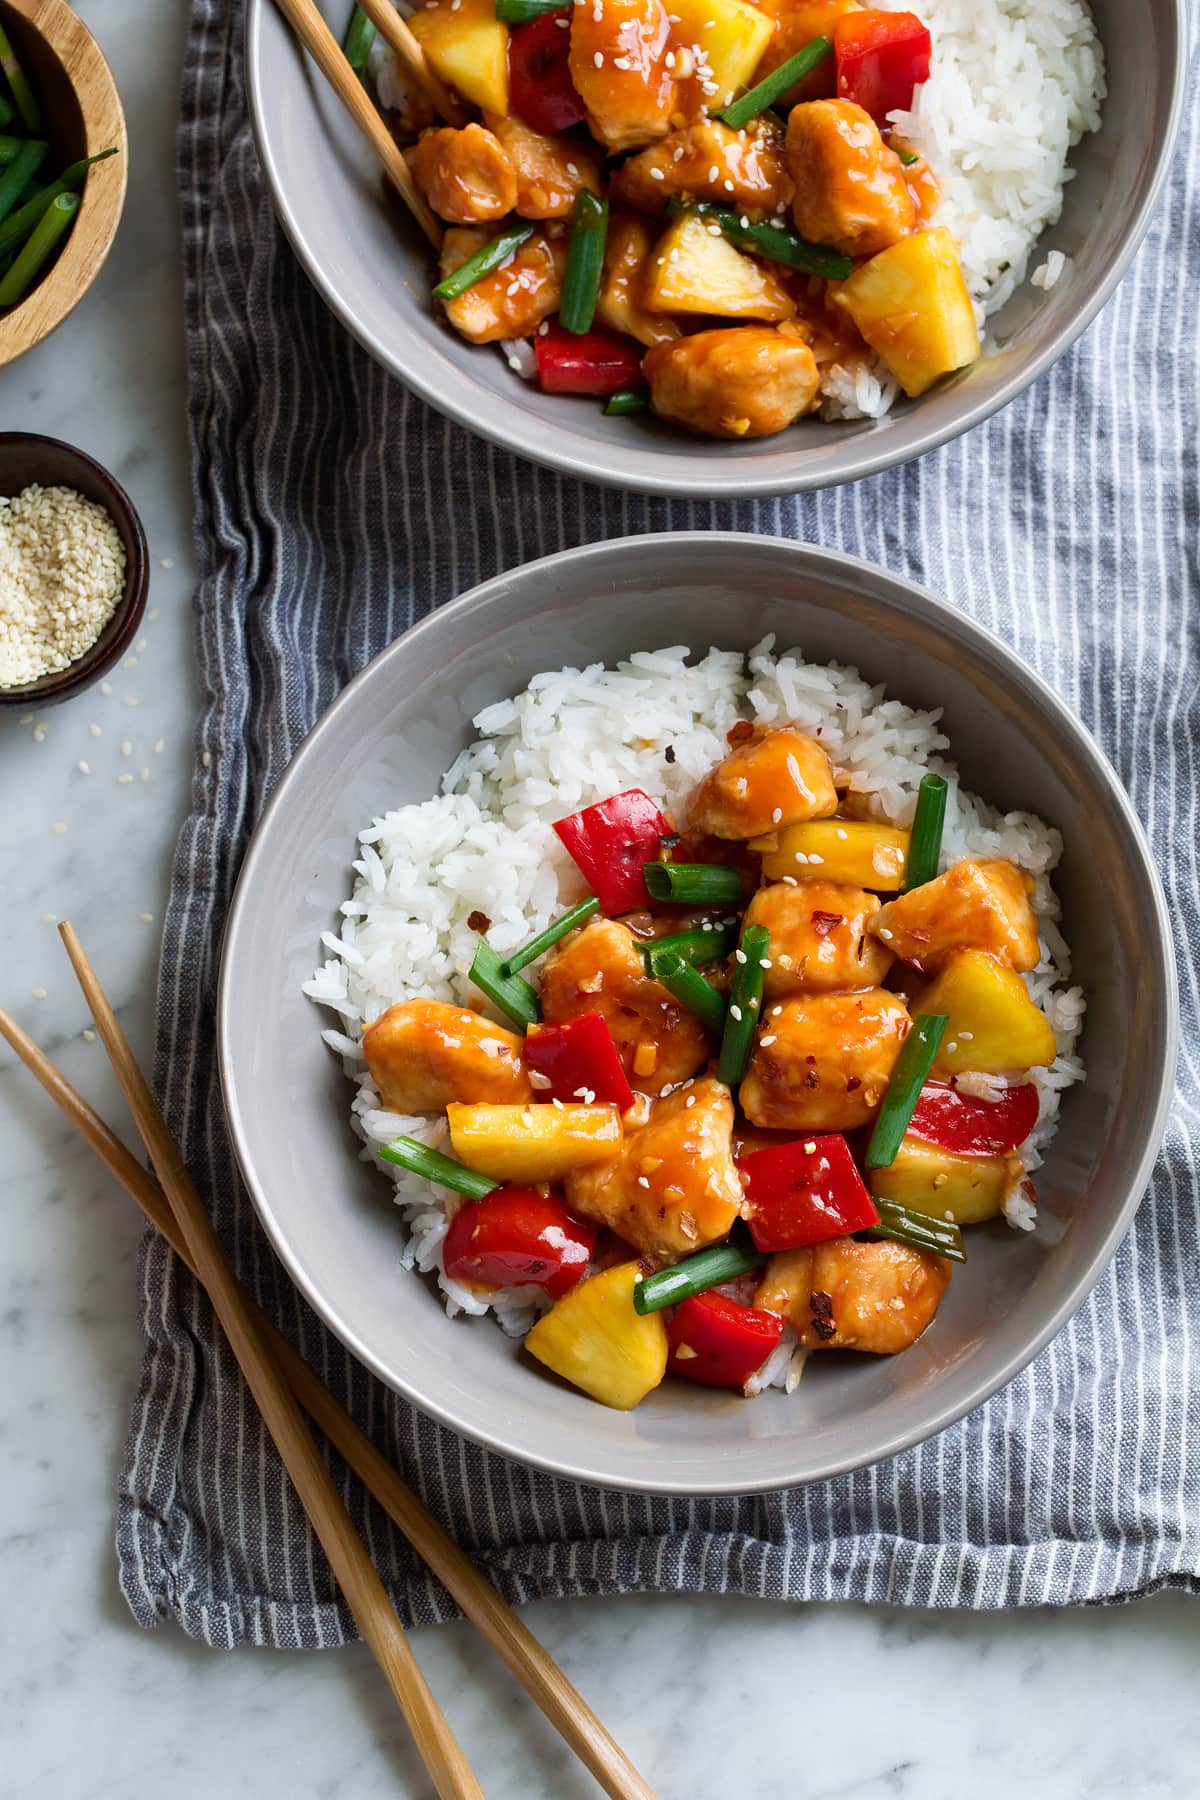 Two servings of sweet and sour chicken over white rice grey serving bowls.